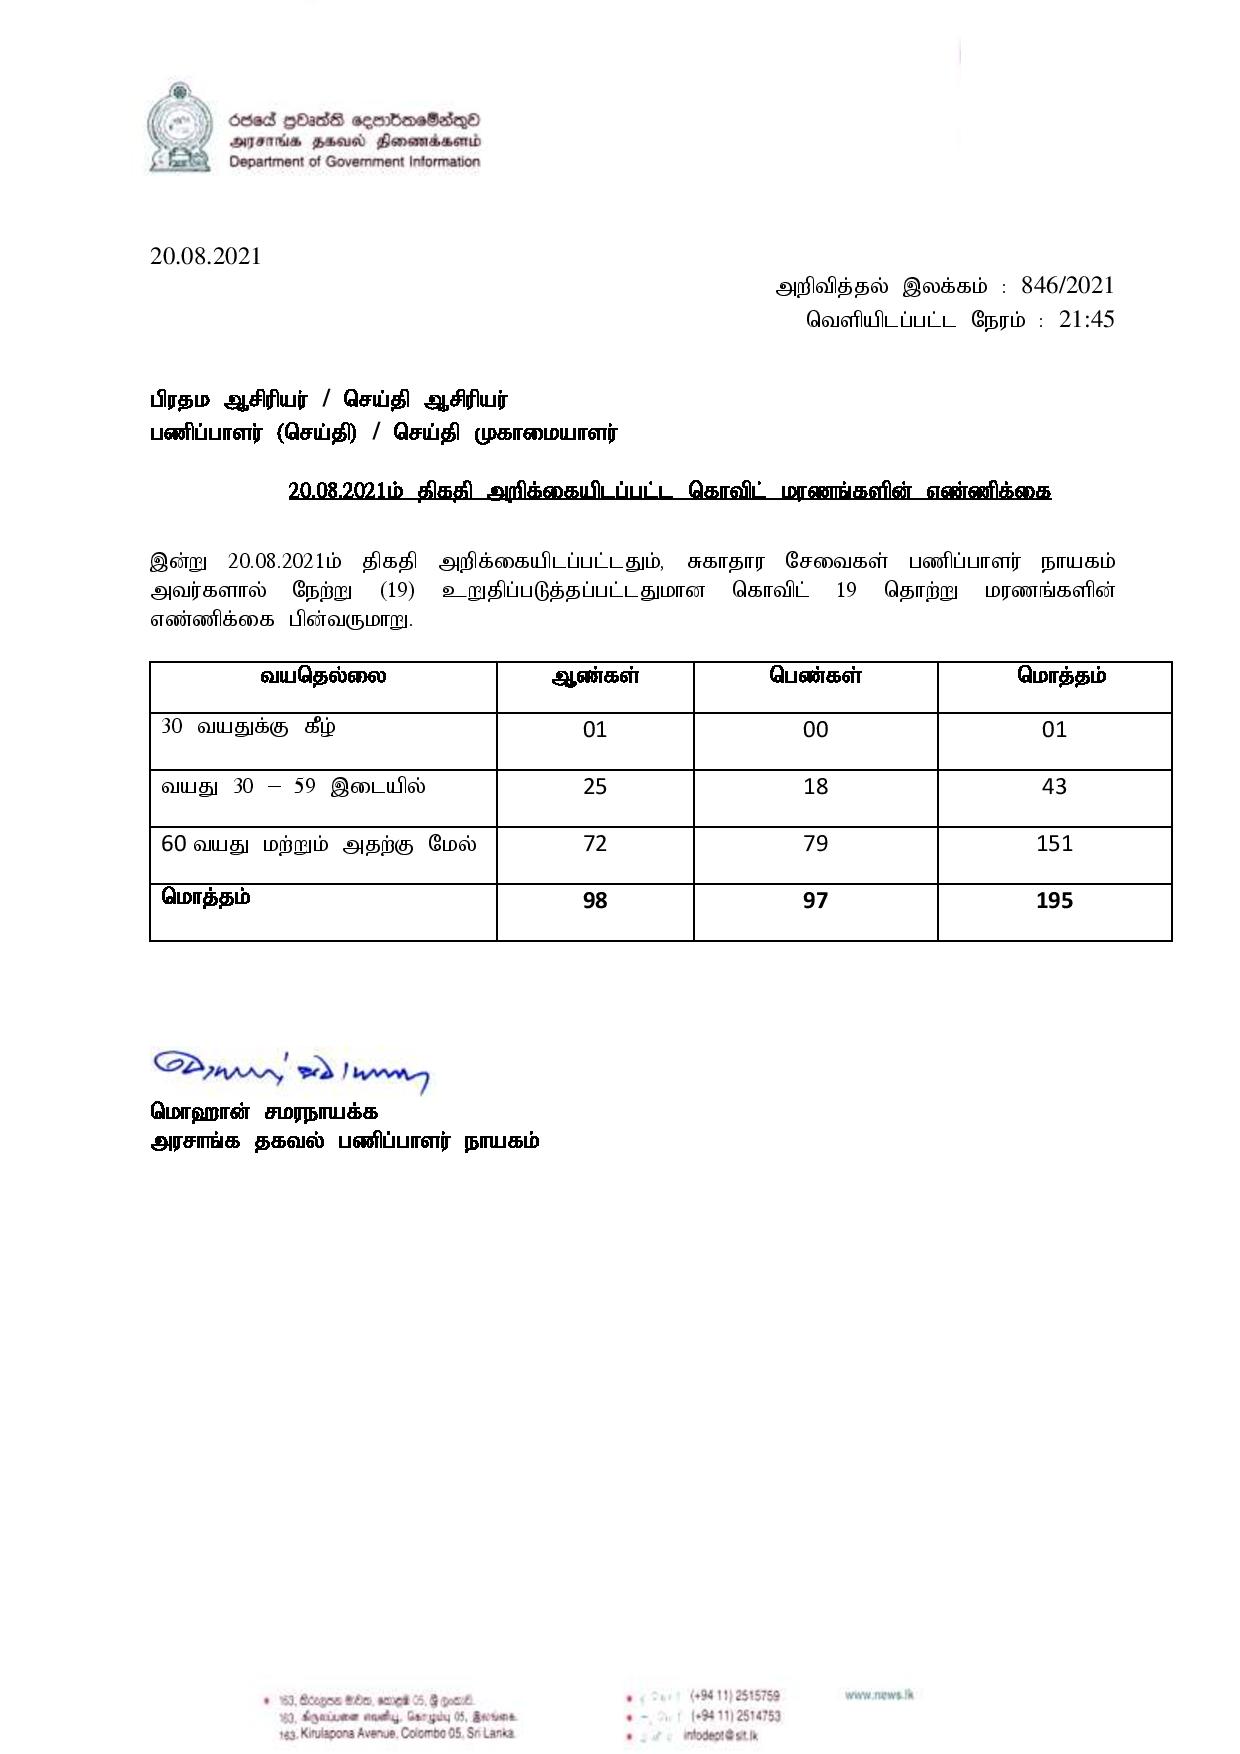 Press Release 846 Tamil 1 page 001